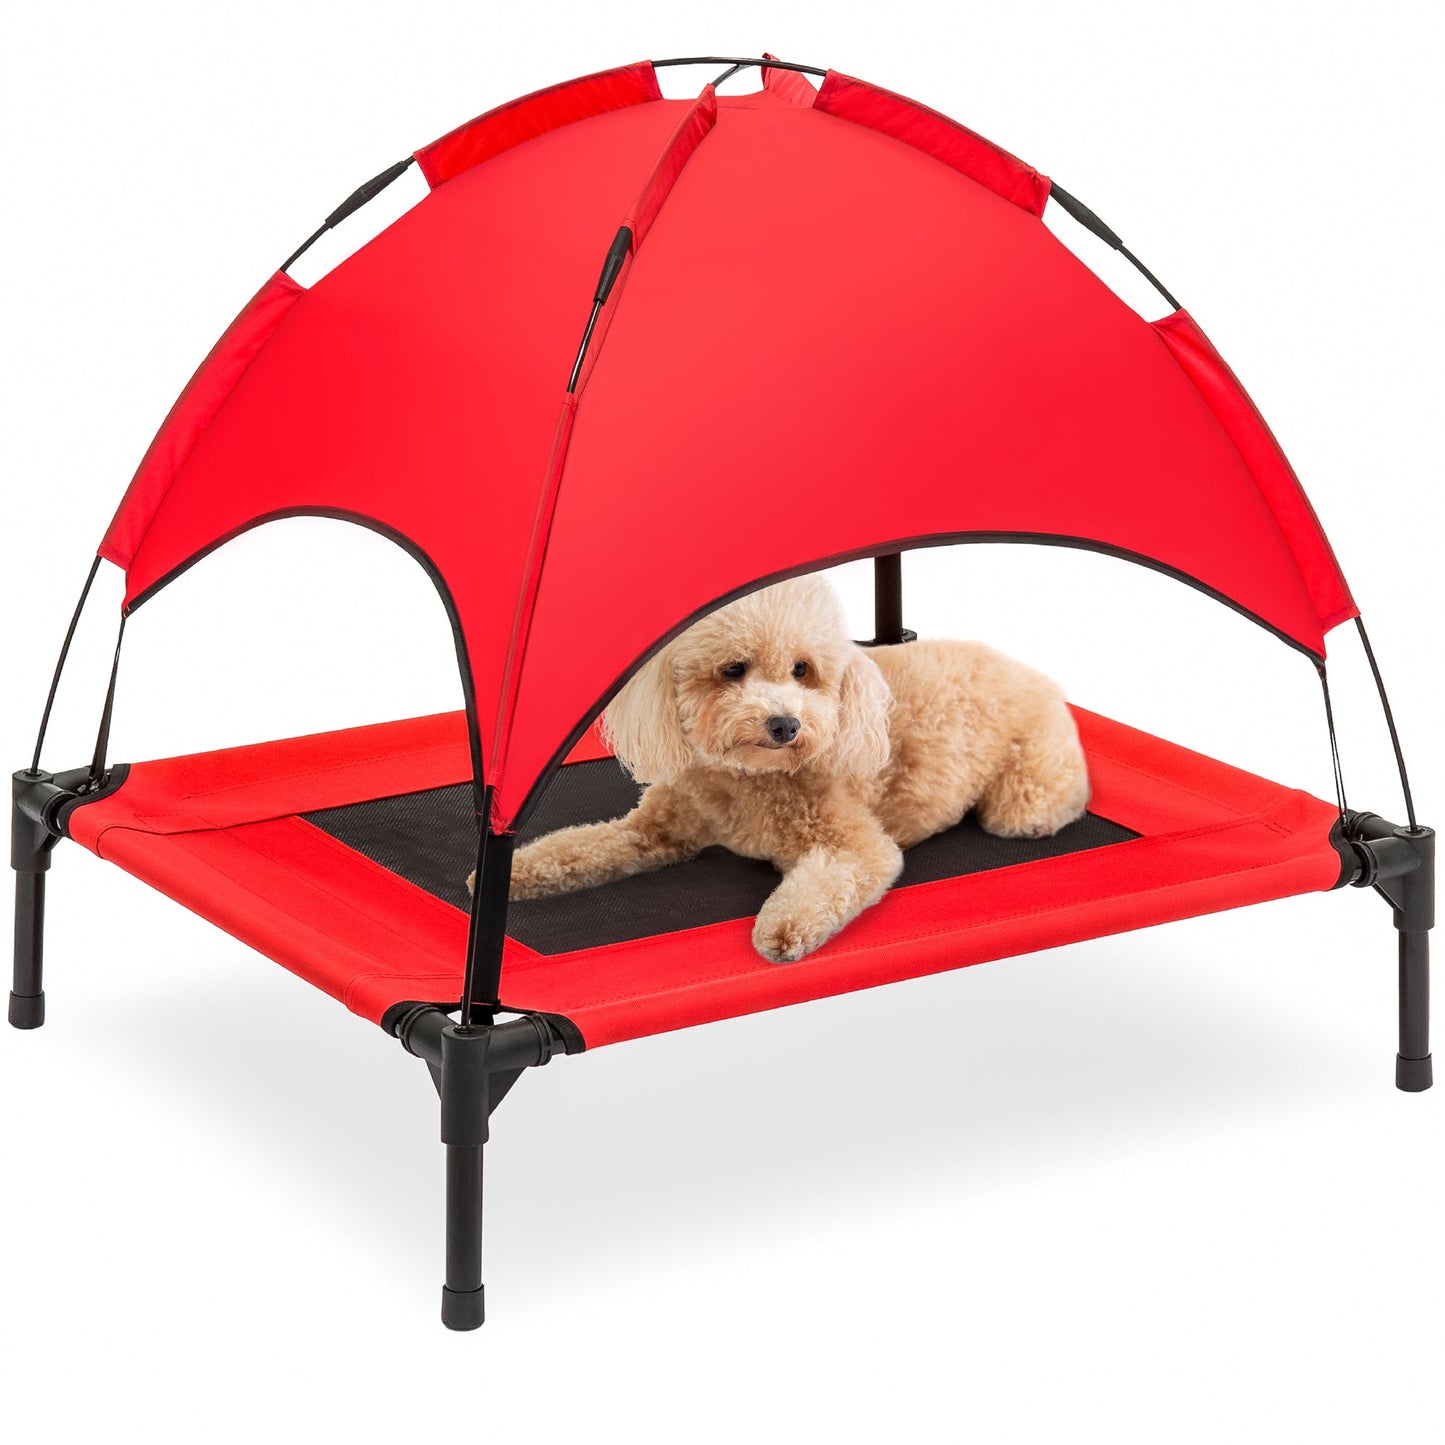 Elevated Cooling Dog Bed, Outdoor Pet Cot w/ Canopy, Carry Bag - 30in